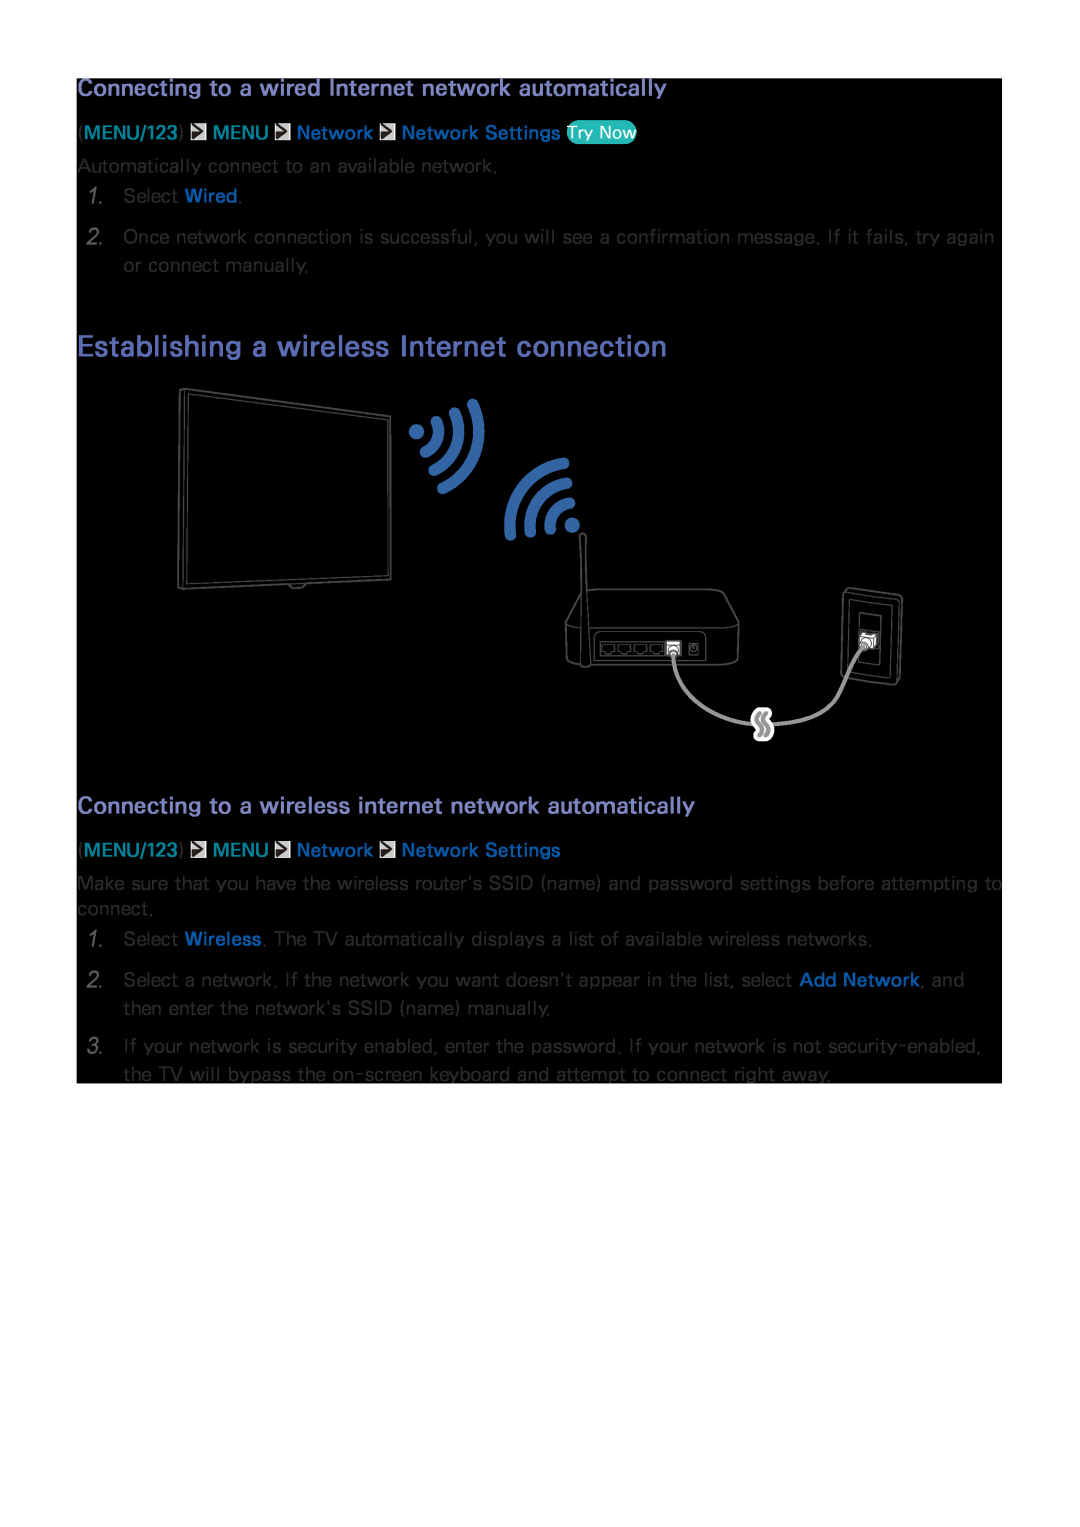 Samsung UE75JU6470UXZG Establishing a wireless Internet connection, Connecting to a wired Internet network automatically 